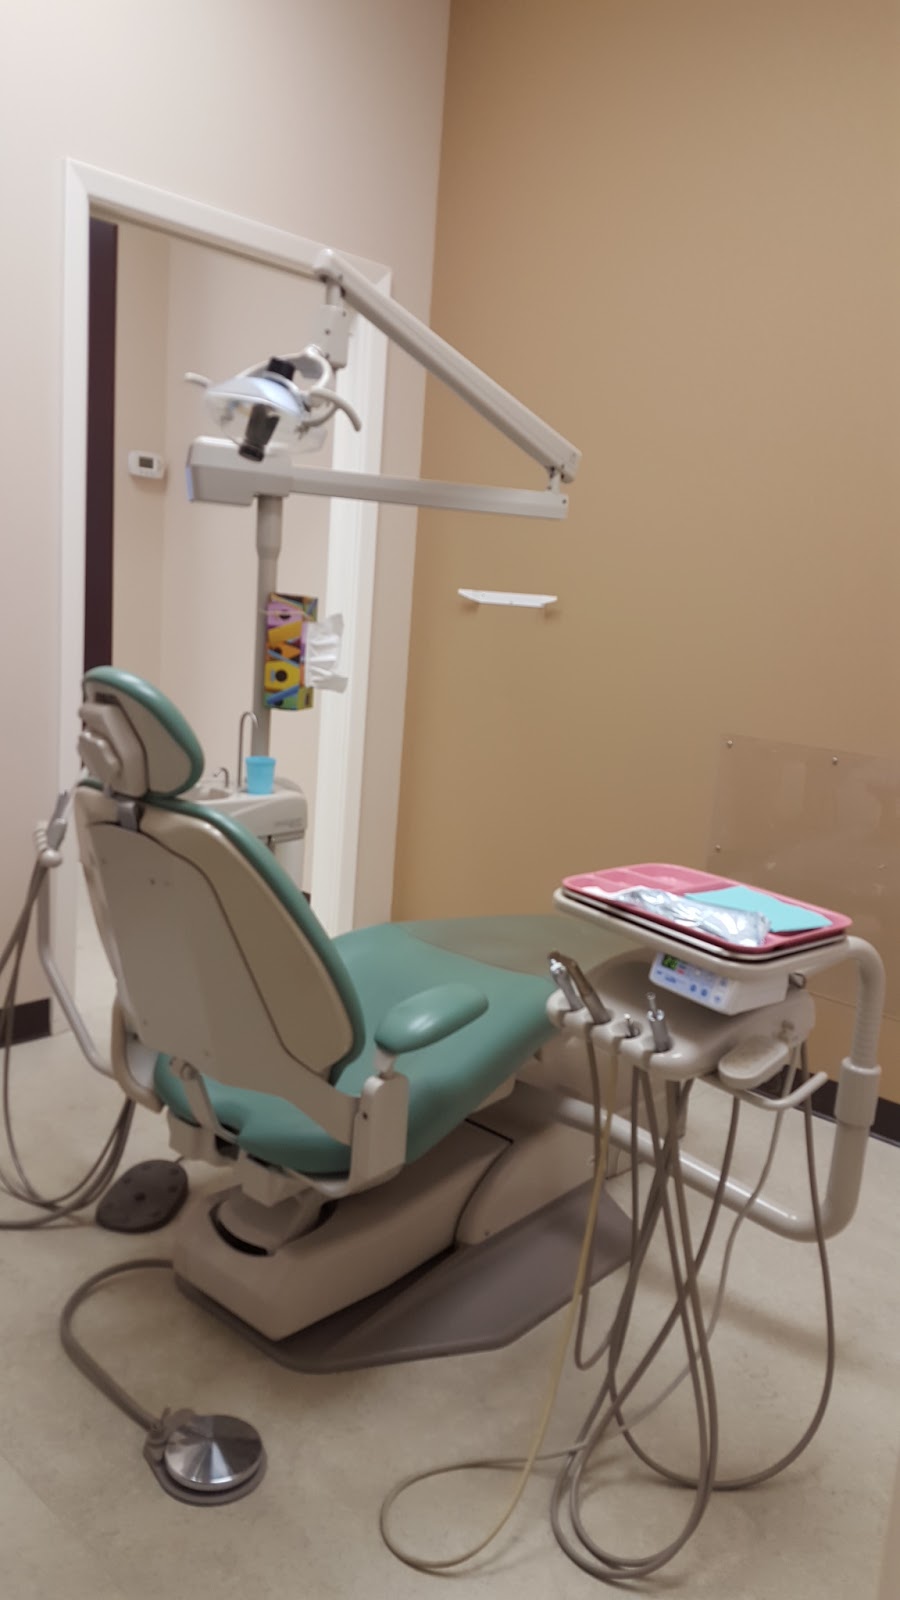 Provost Dental Centre | 4-1019 Sheppard Ave E, North York, ON M2K 1C2, Canada | Phone: (416) 221-6989